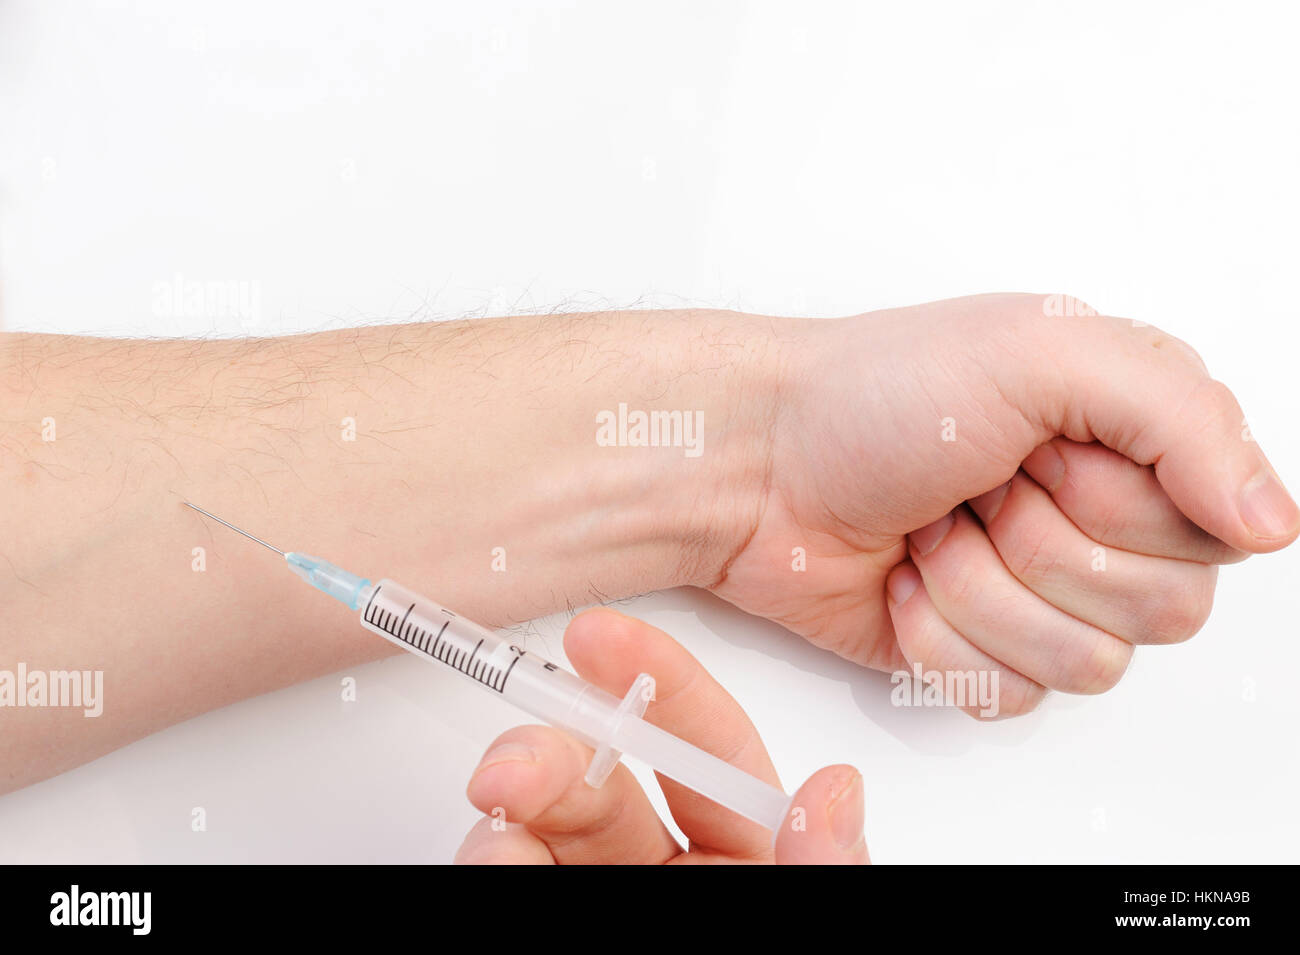 flu Injection on hand on white background Stock Photo